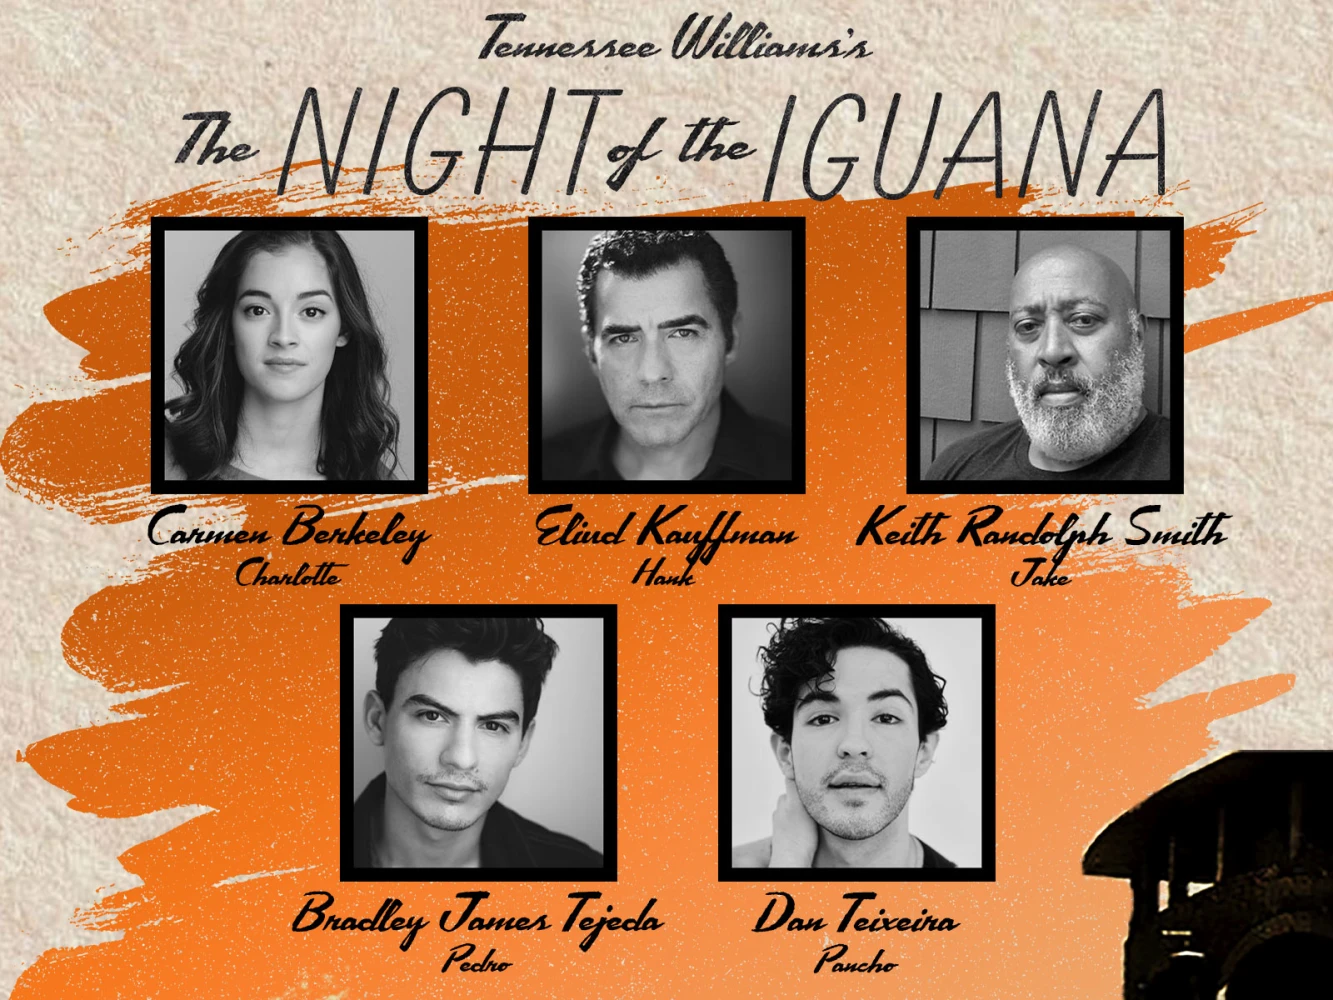 Tennessee Williams's The Night of the Iguana: What to expect - 9